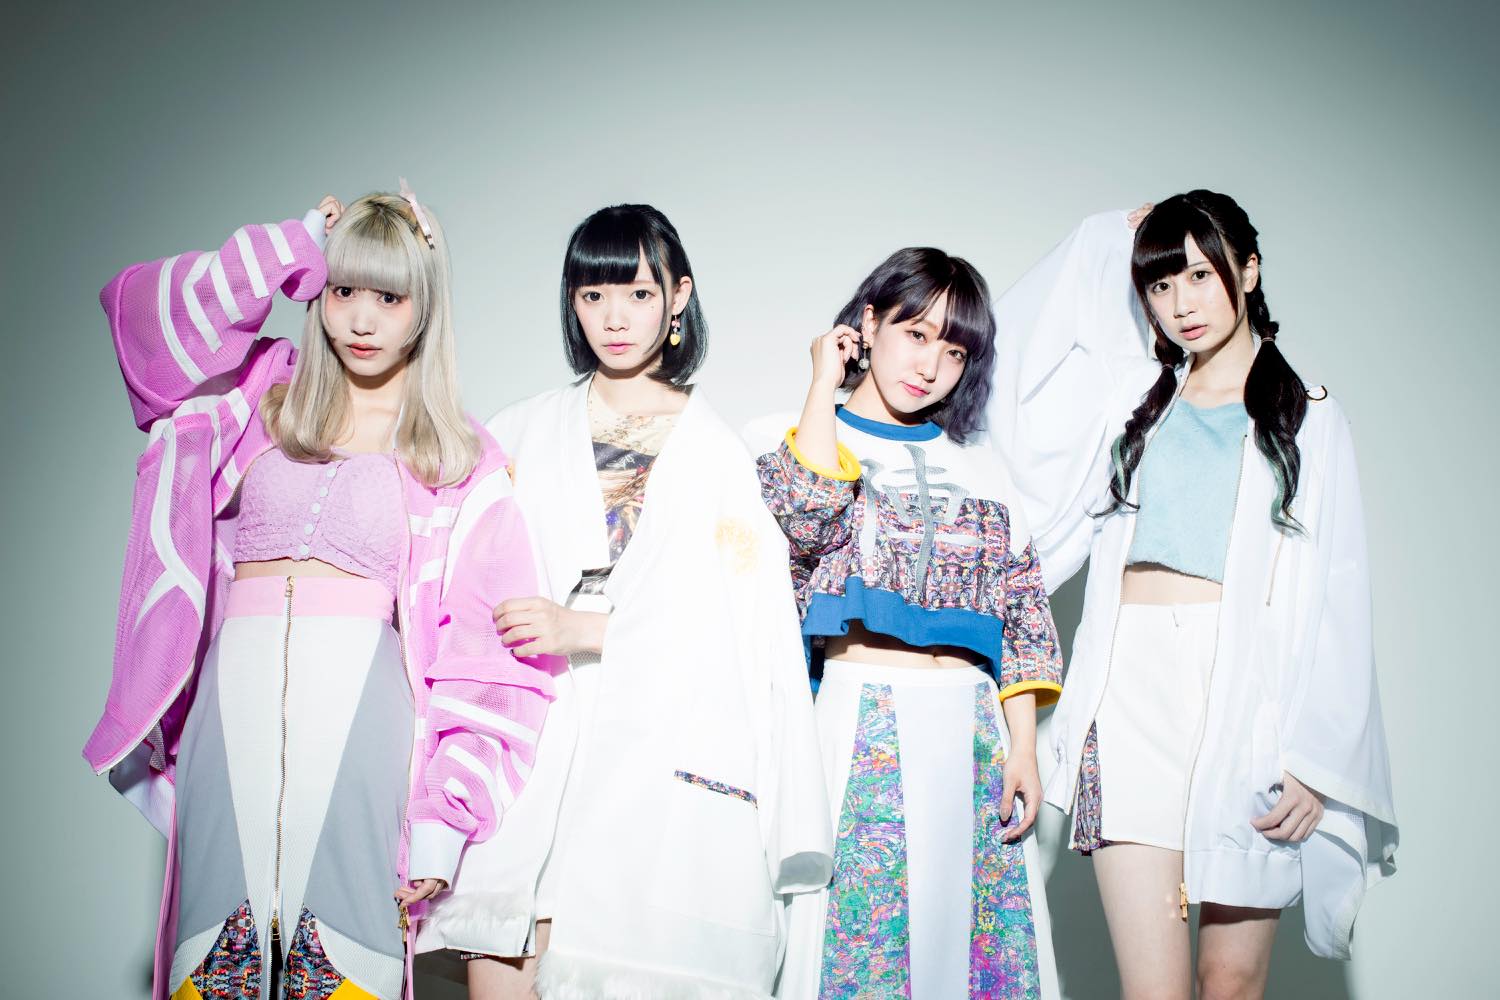 uijin Heats Up Neo Tokyo With MV for “meltdown”!